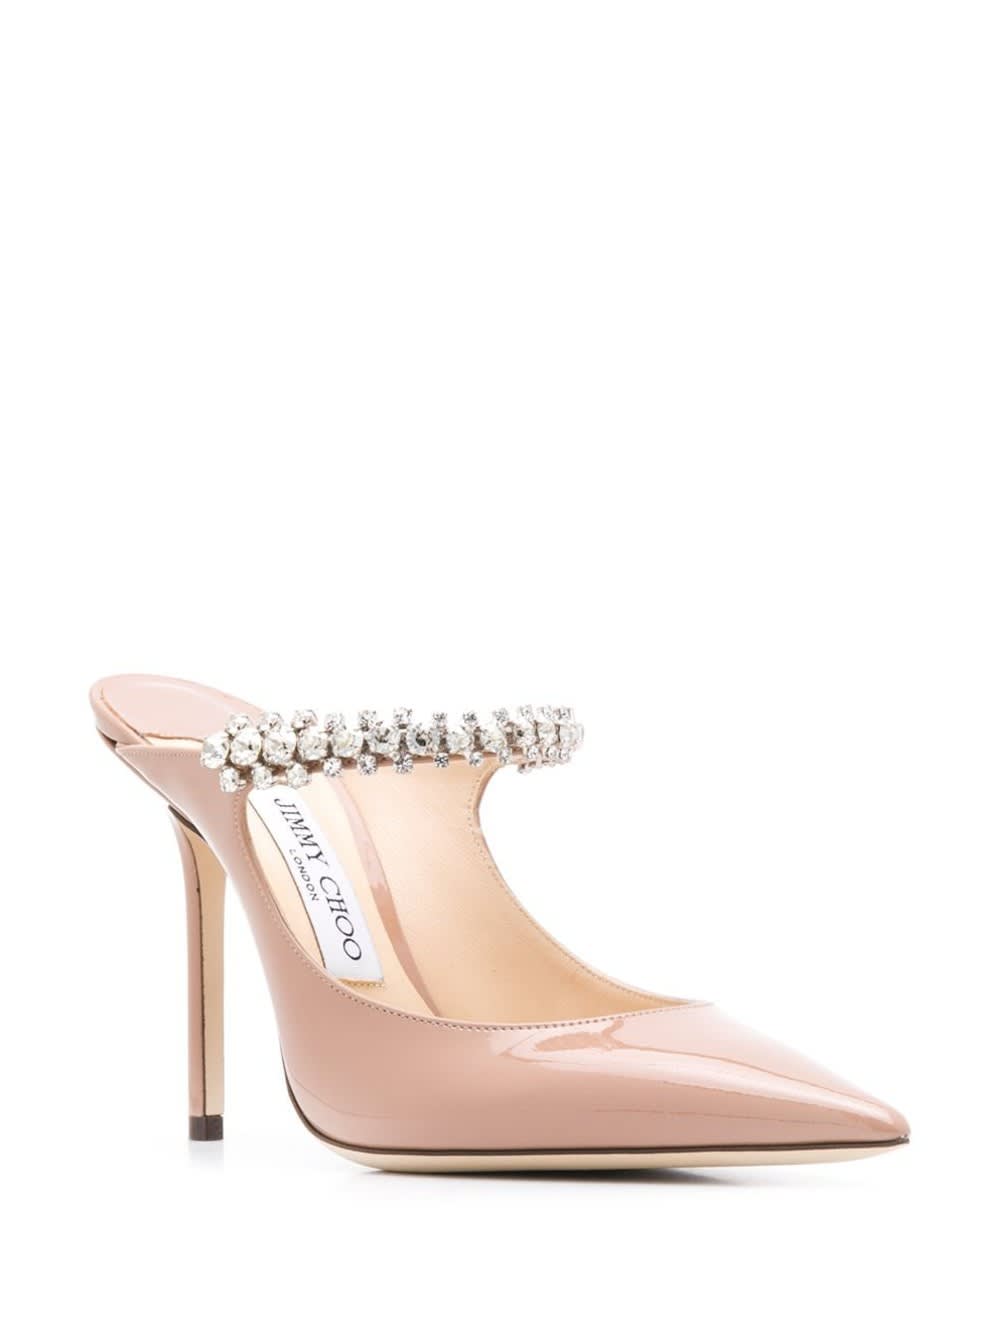 Shop Jimmy Choo Womans Pink Patent Leather Pumps With Crystal Strap Detail In Ballet Pink